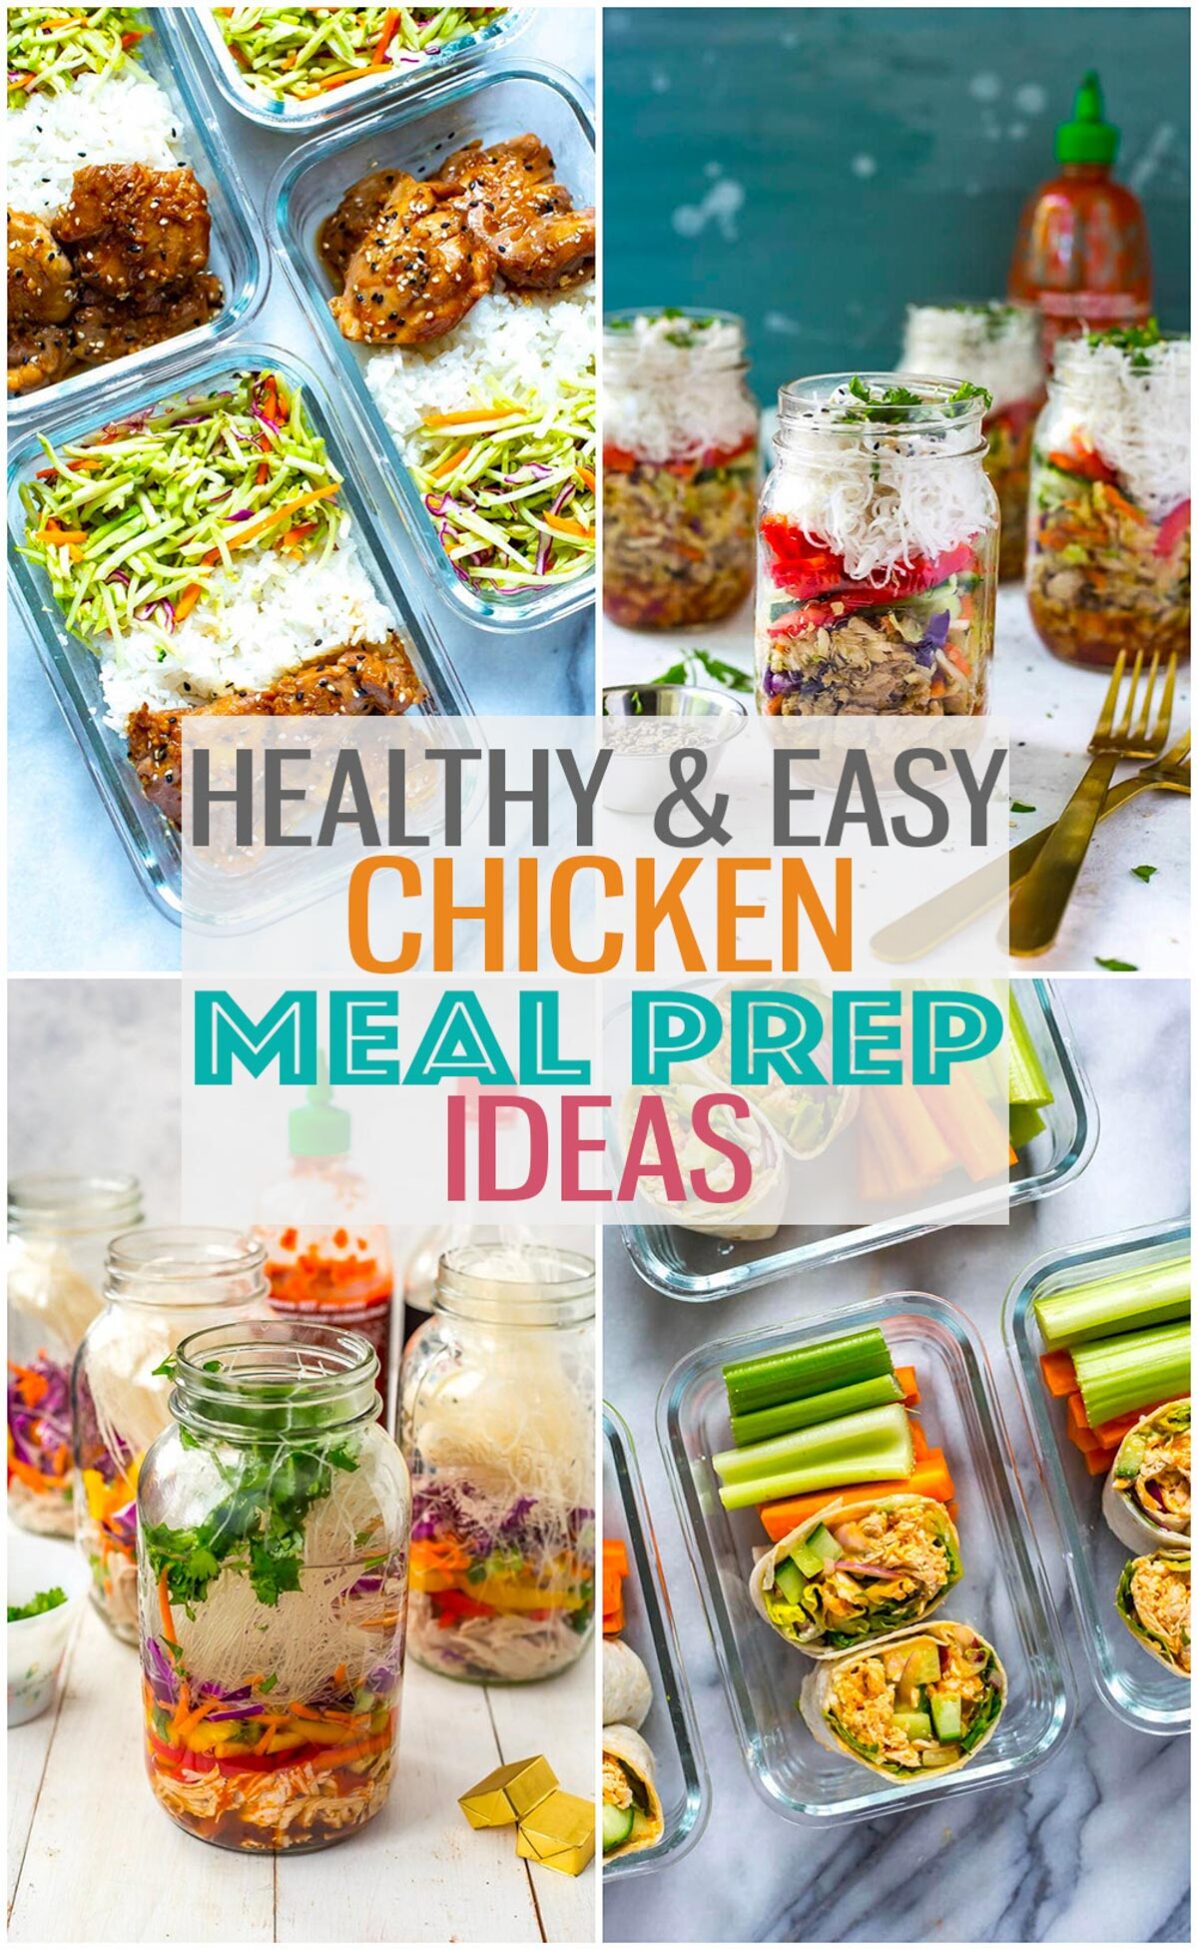 A collage of four different chicken meal prep ideas with the text "Healthy & Easy Chicken Meal Prep Ideas" layered over top.